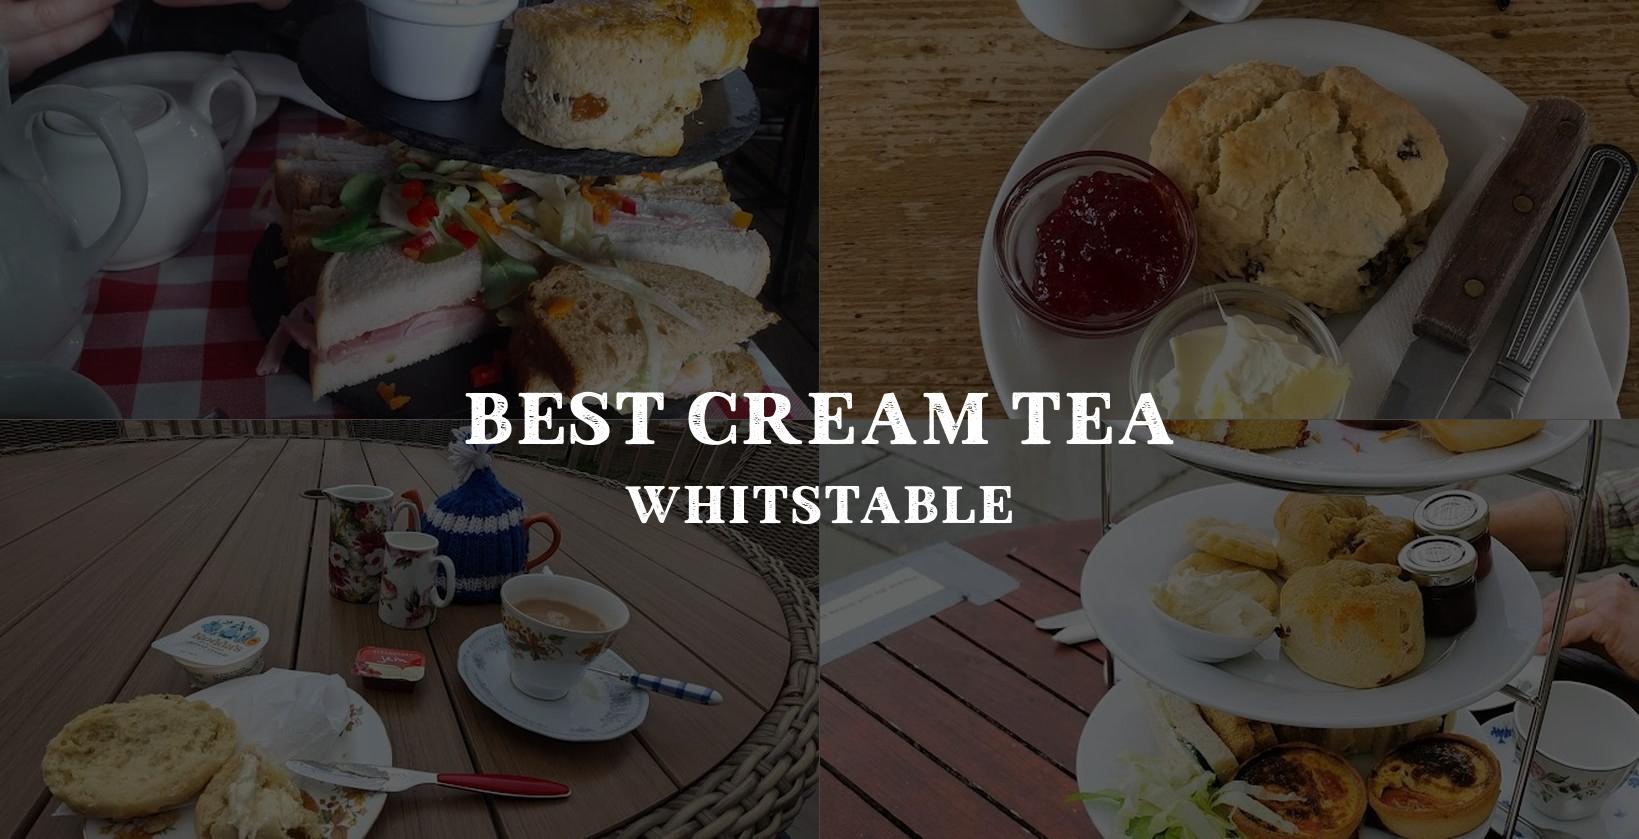 Choosing the perfect spot for cream tea in Whitstable